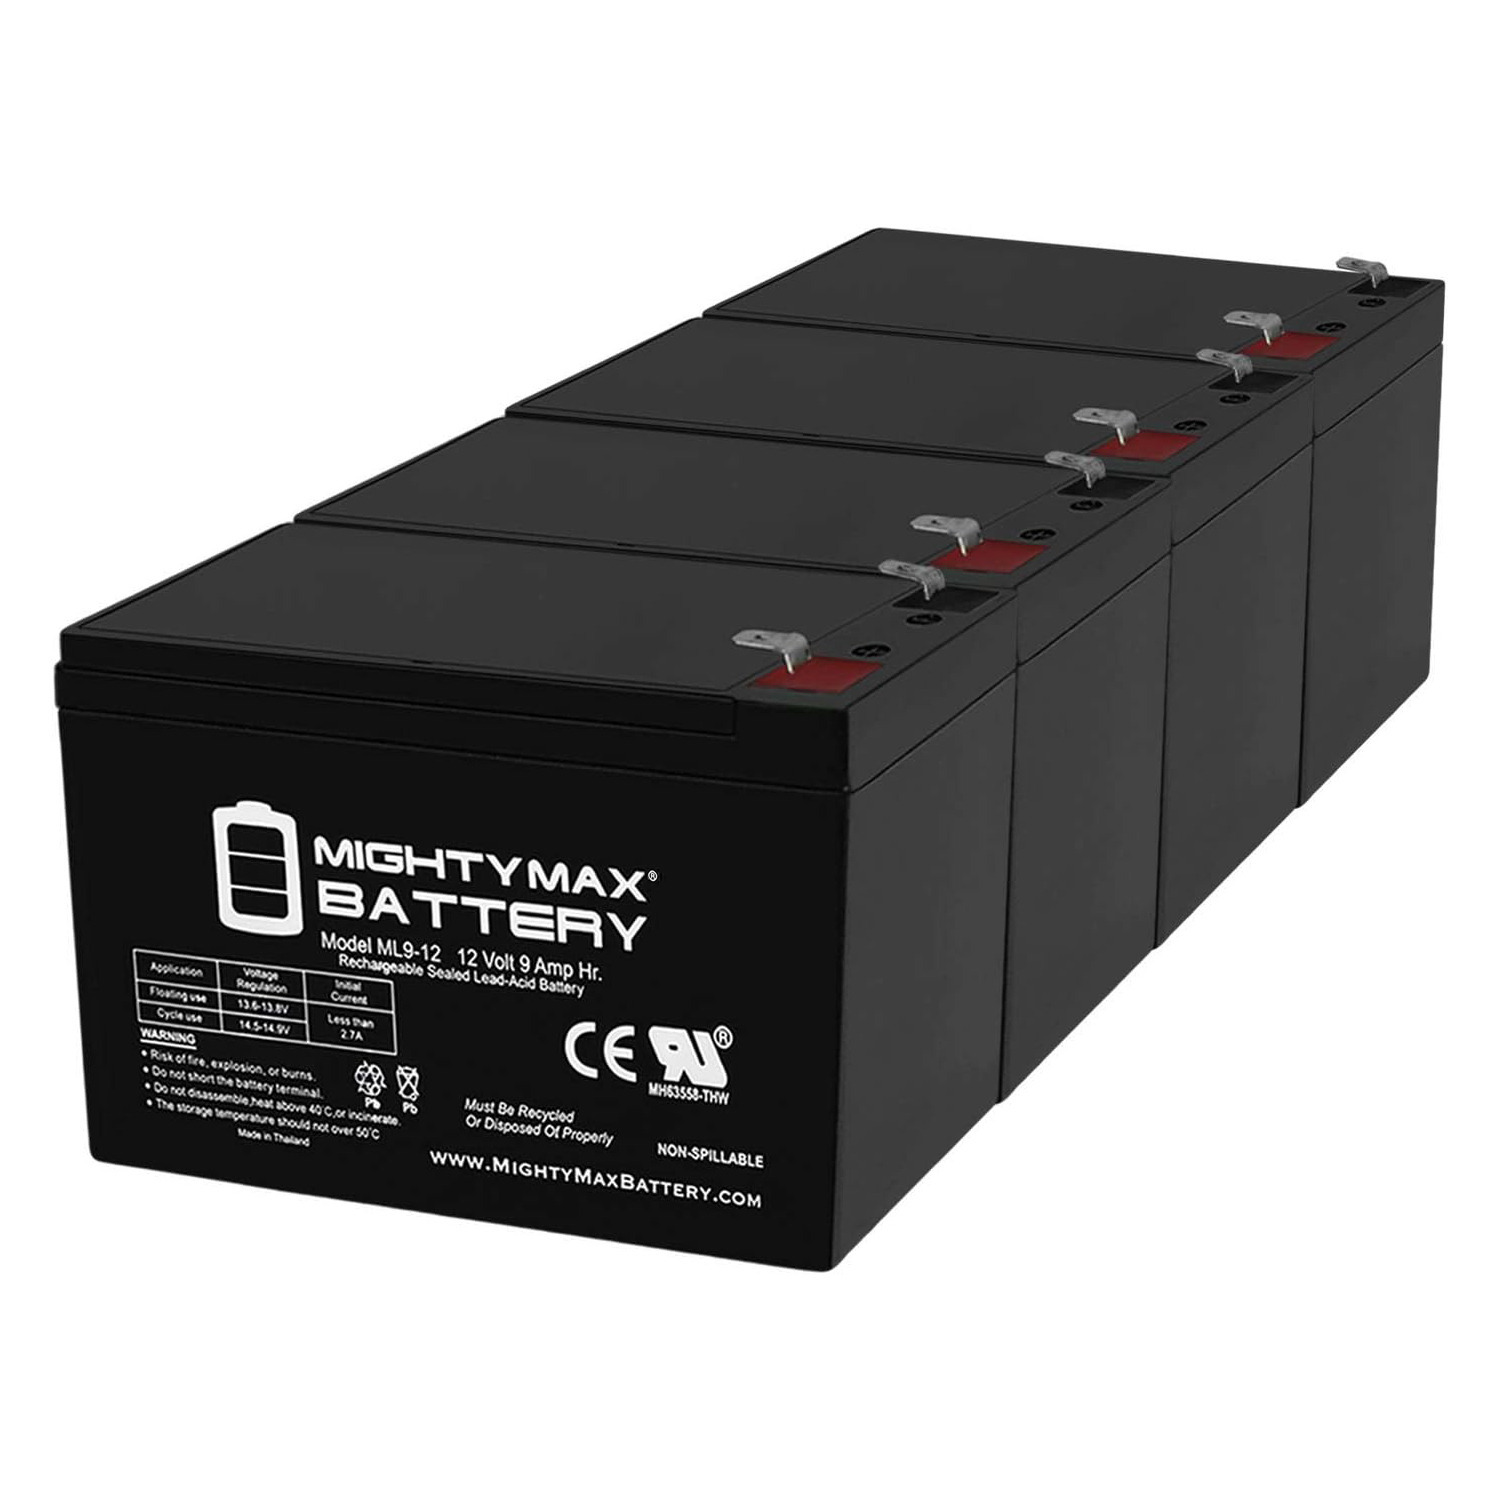 Altronix SMP3PMCTX 12V, 9Ah Lead Acid Battery - 4 Pack